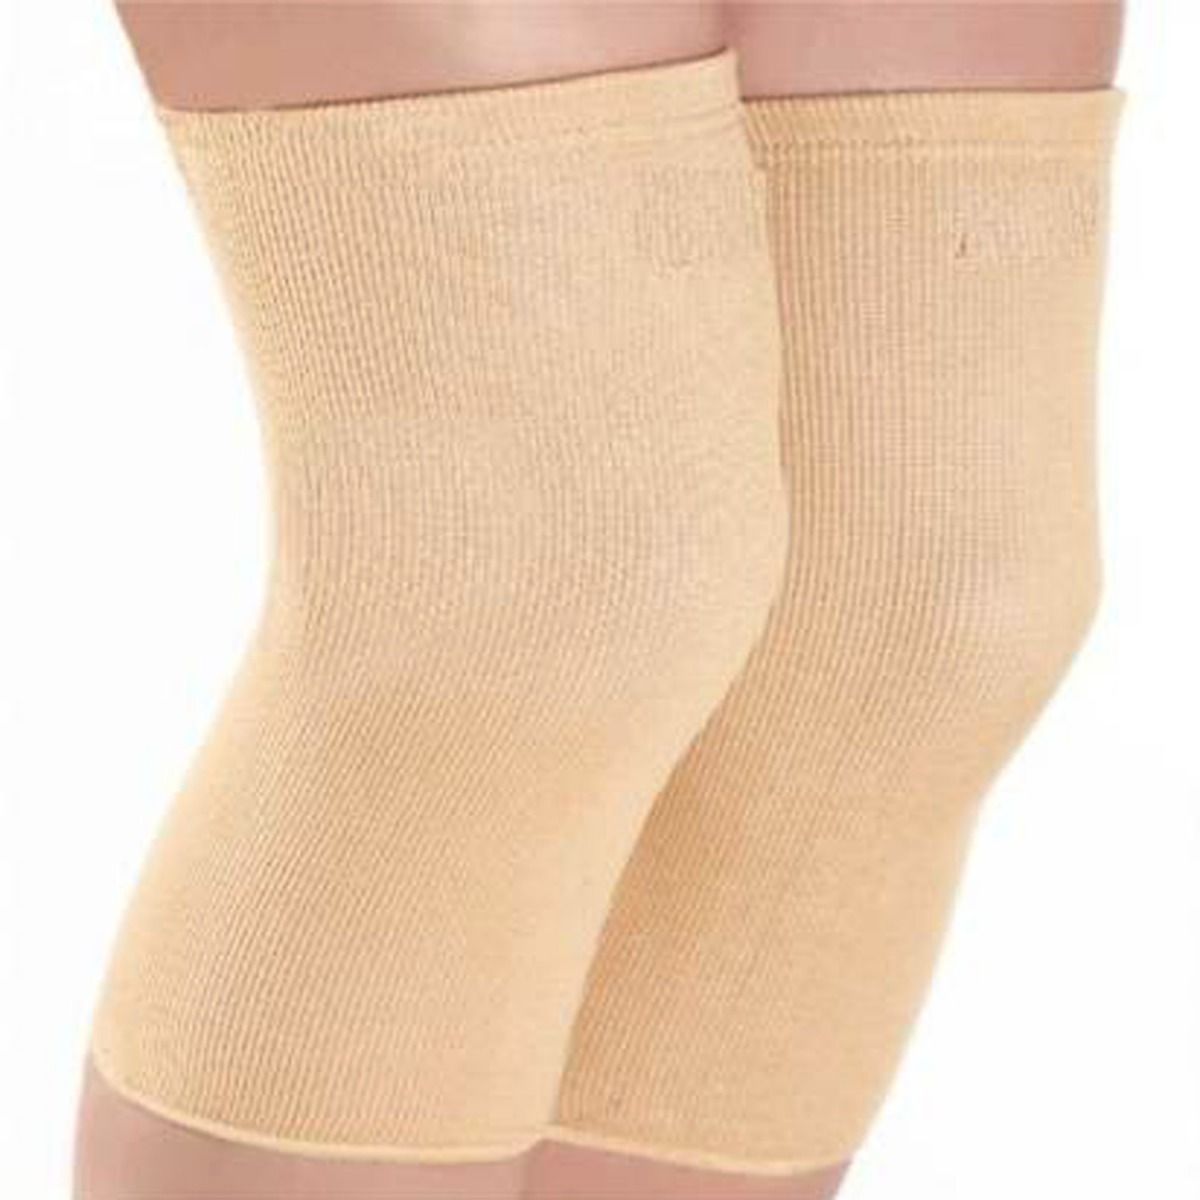 Tynor Knee Cap Small, 1 Count, Pack of 1 